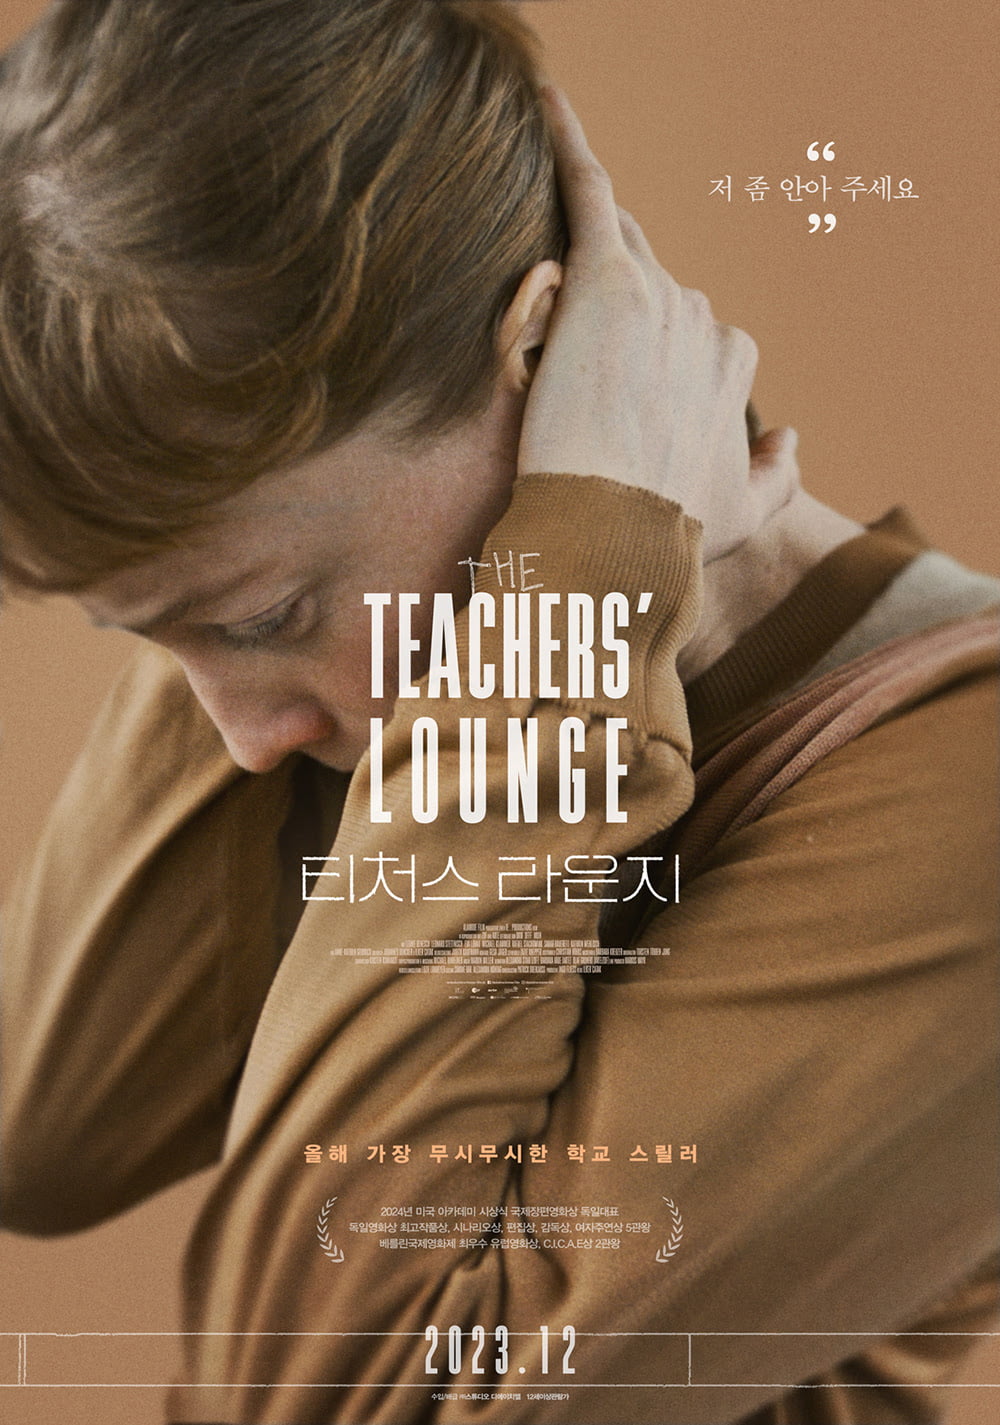 Movie 'Teacher's Lounge', the ordeal of a new teacher solving a series of school theft cases